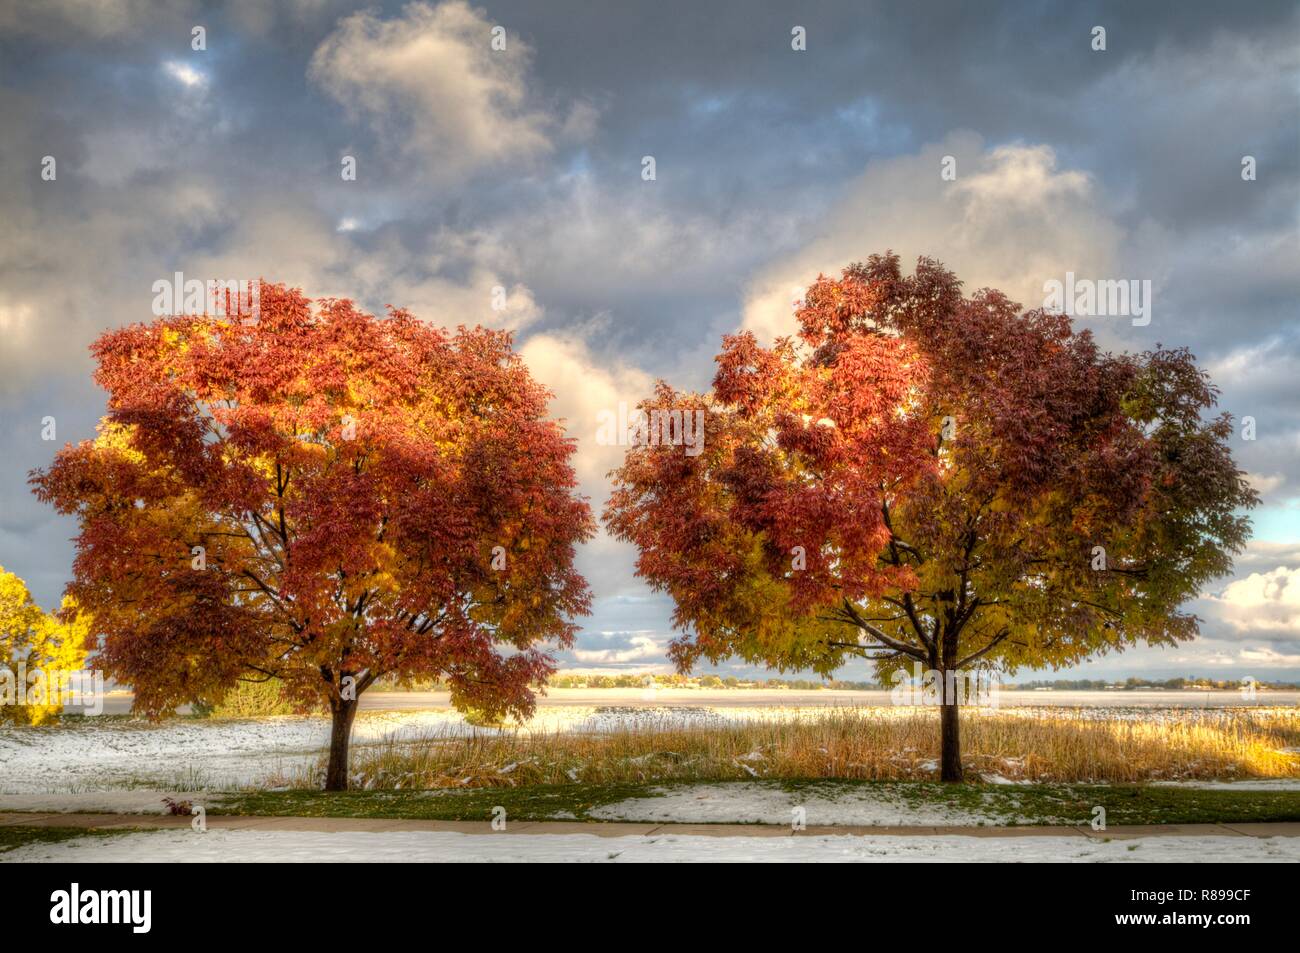 Two Autumn Purple Ash Trees in full fall leaf shortly after an early season snow fall. Stock Photo